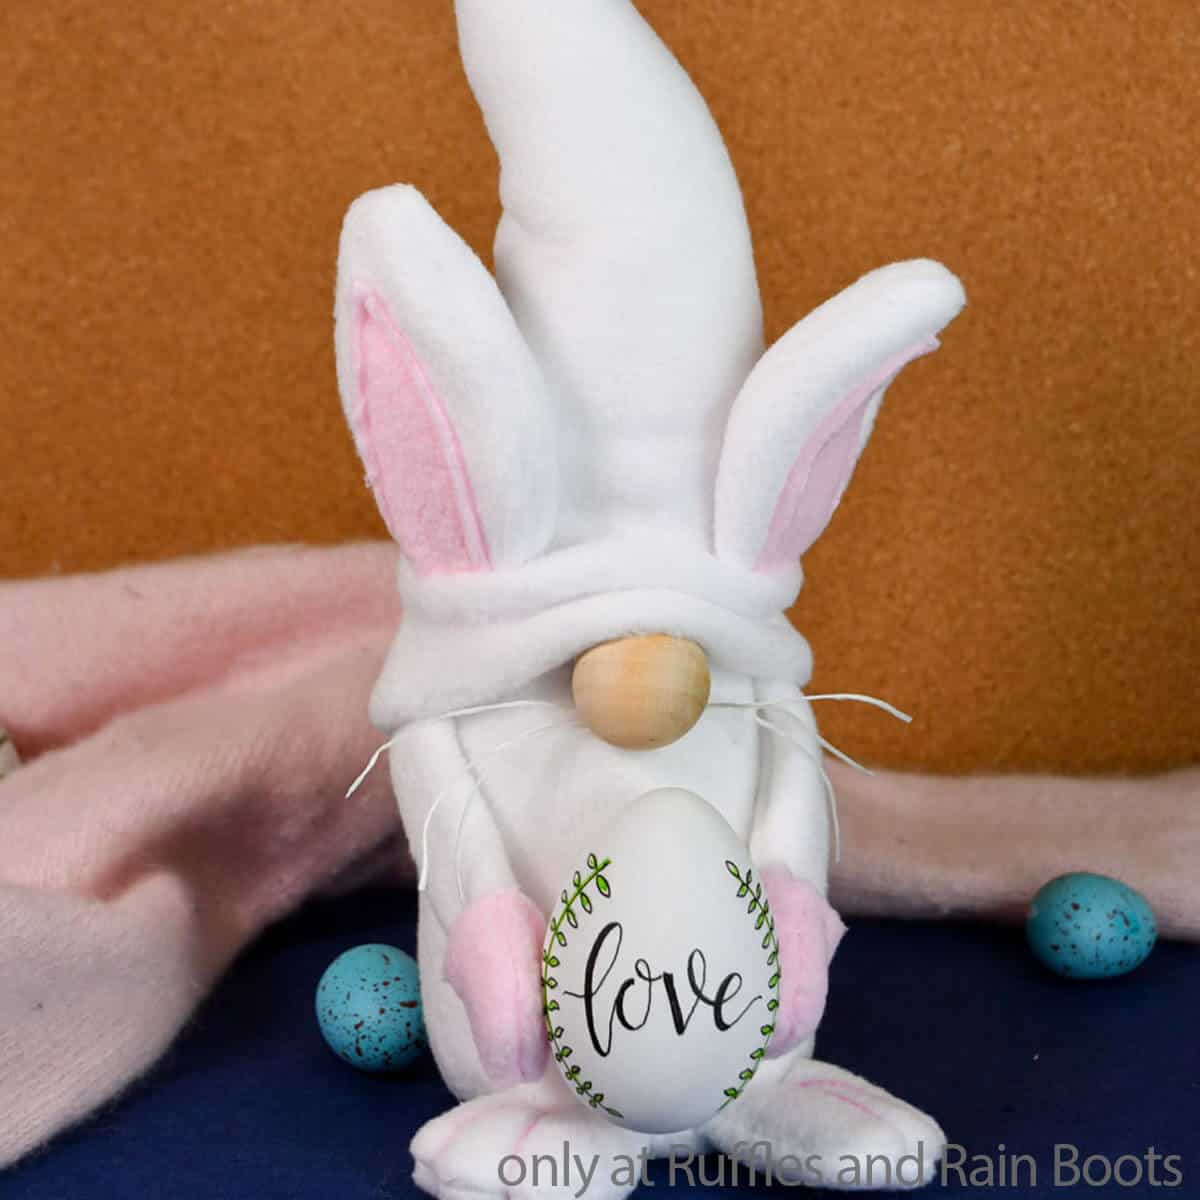 Square image of a white Easter bunny gnome holding an egg in front of a cork background.